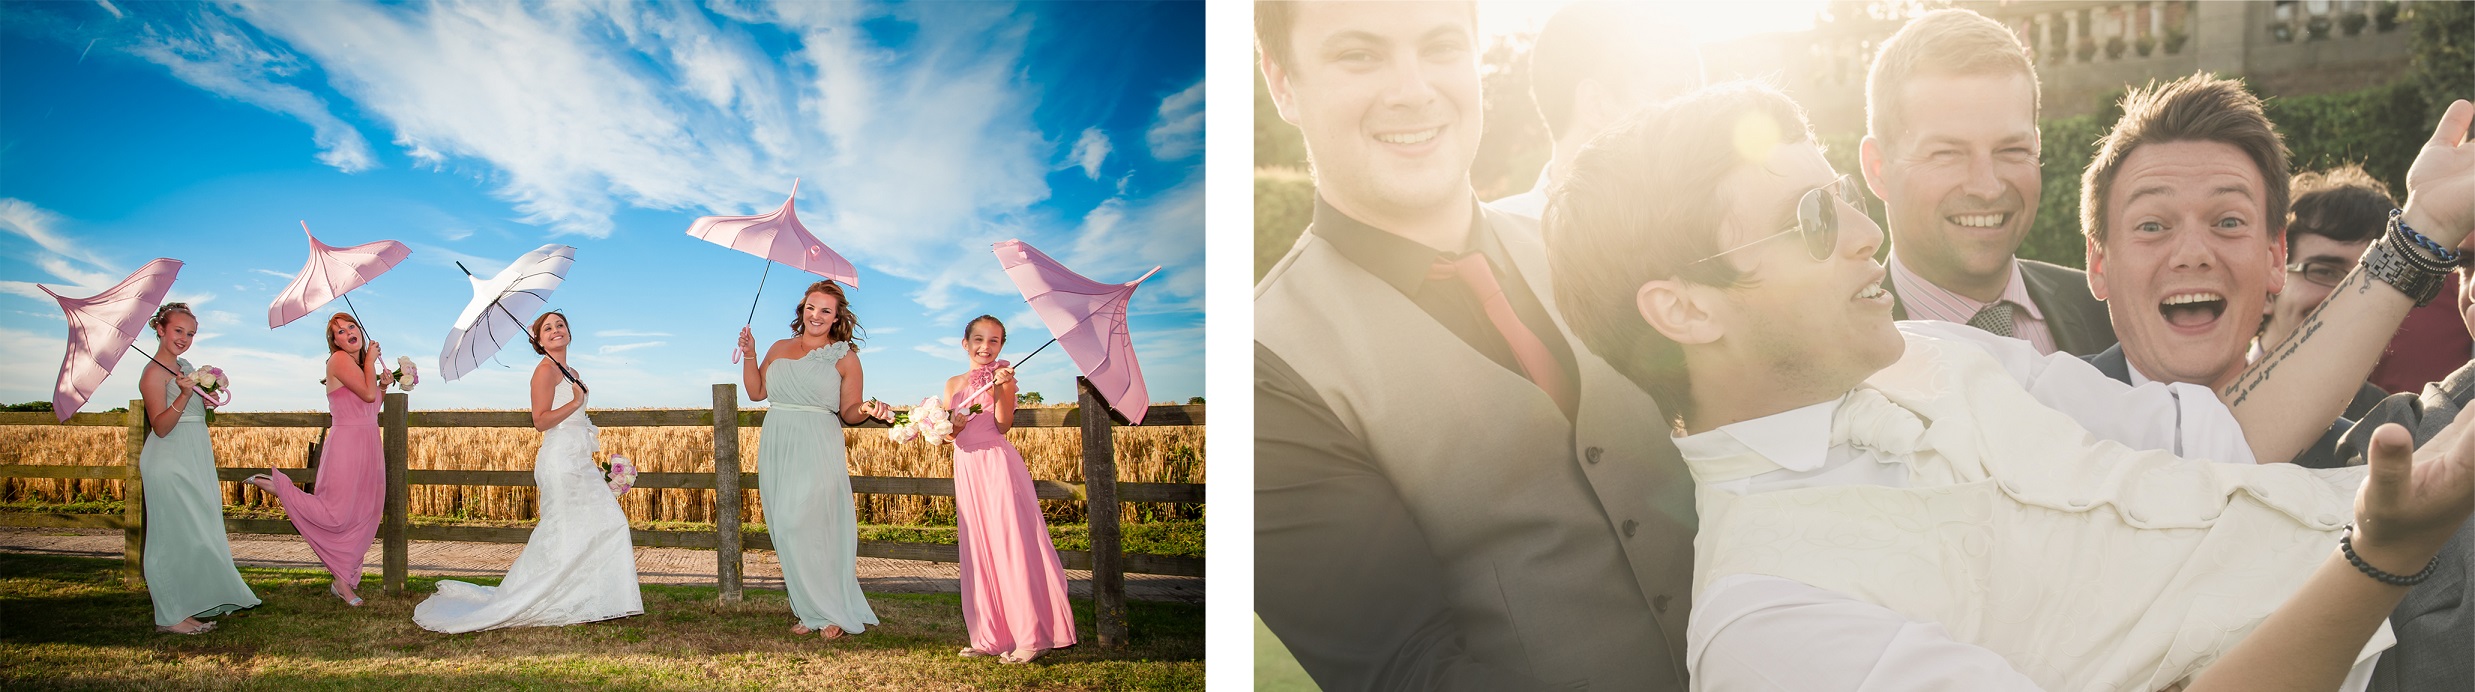 Capturing the fun of the wedding day